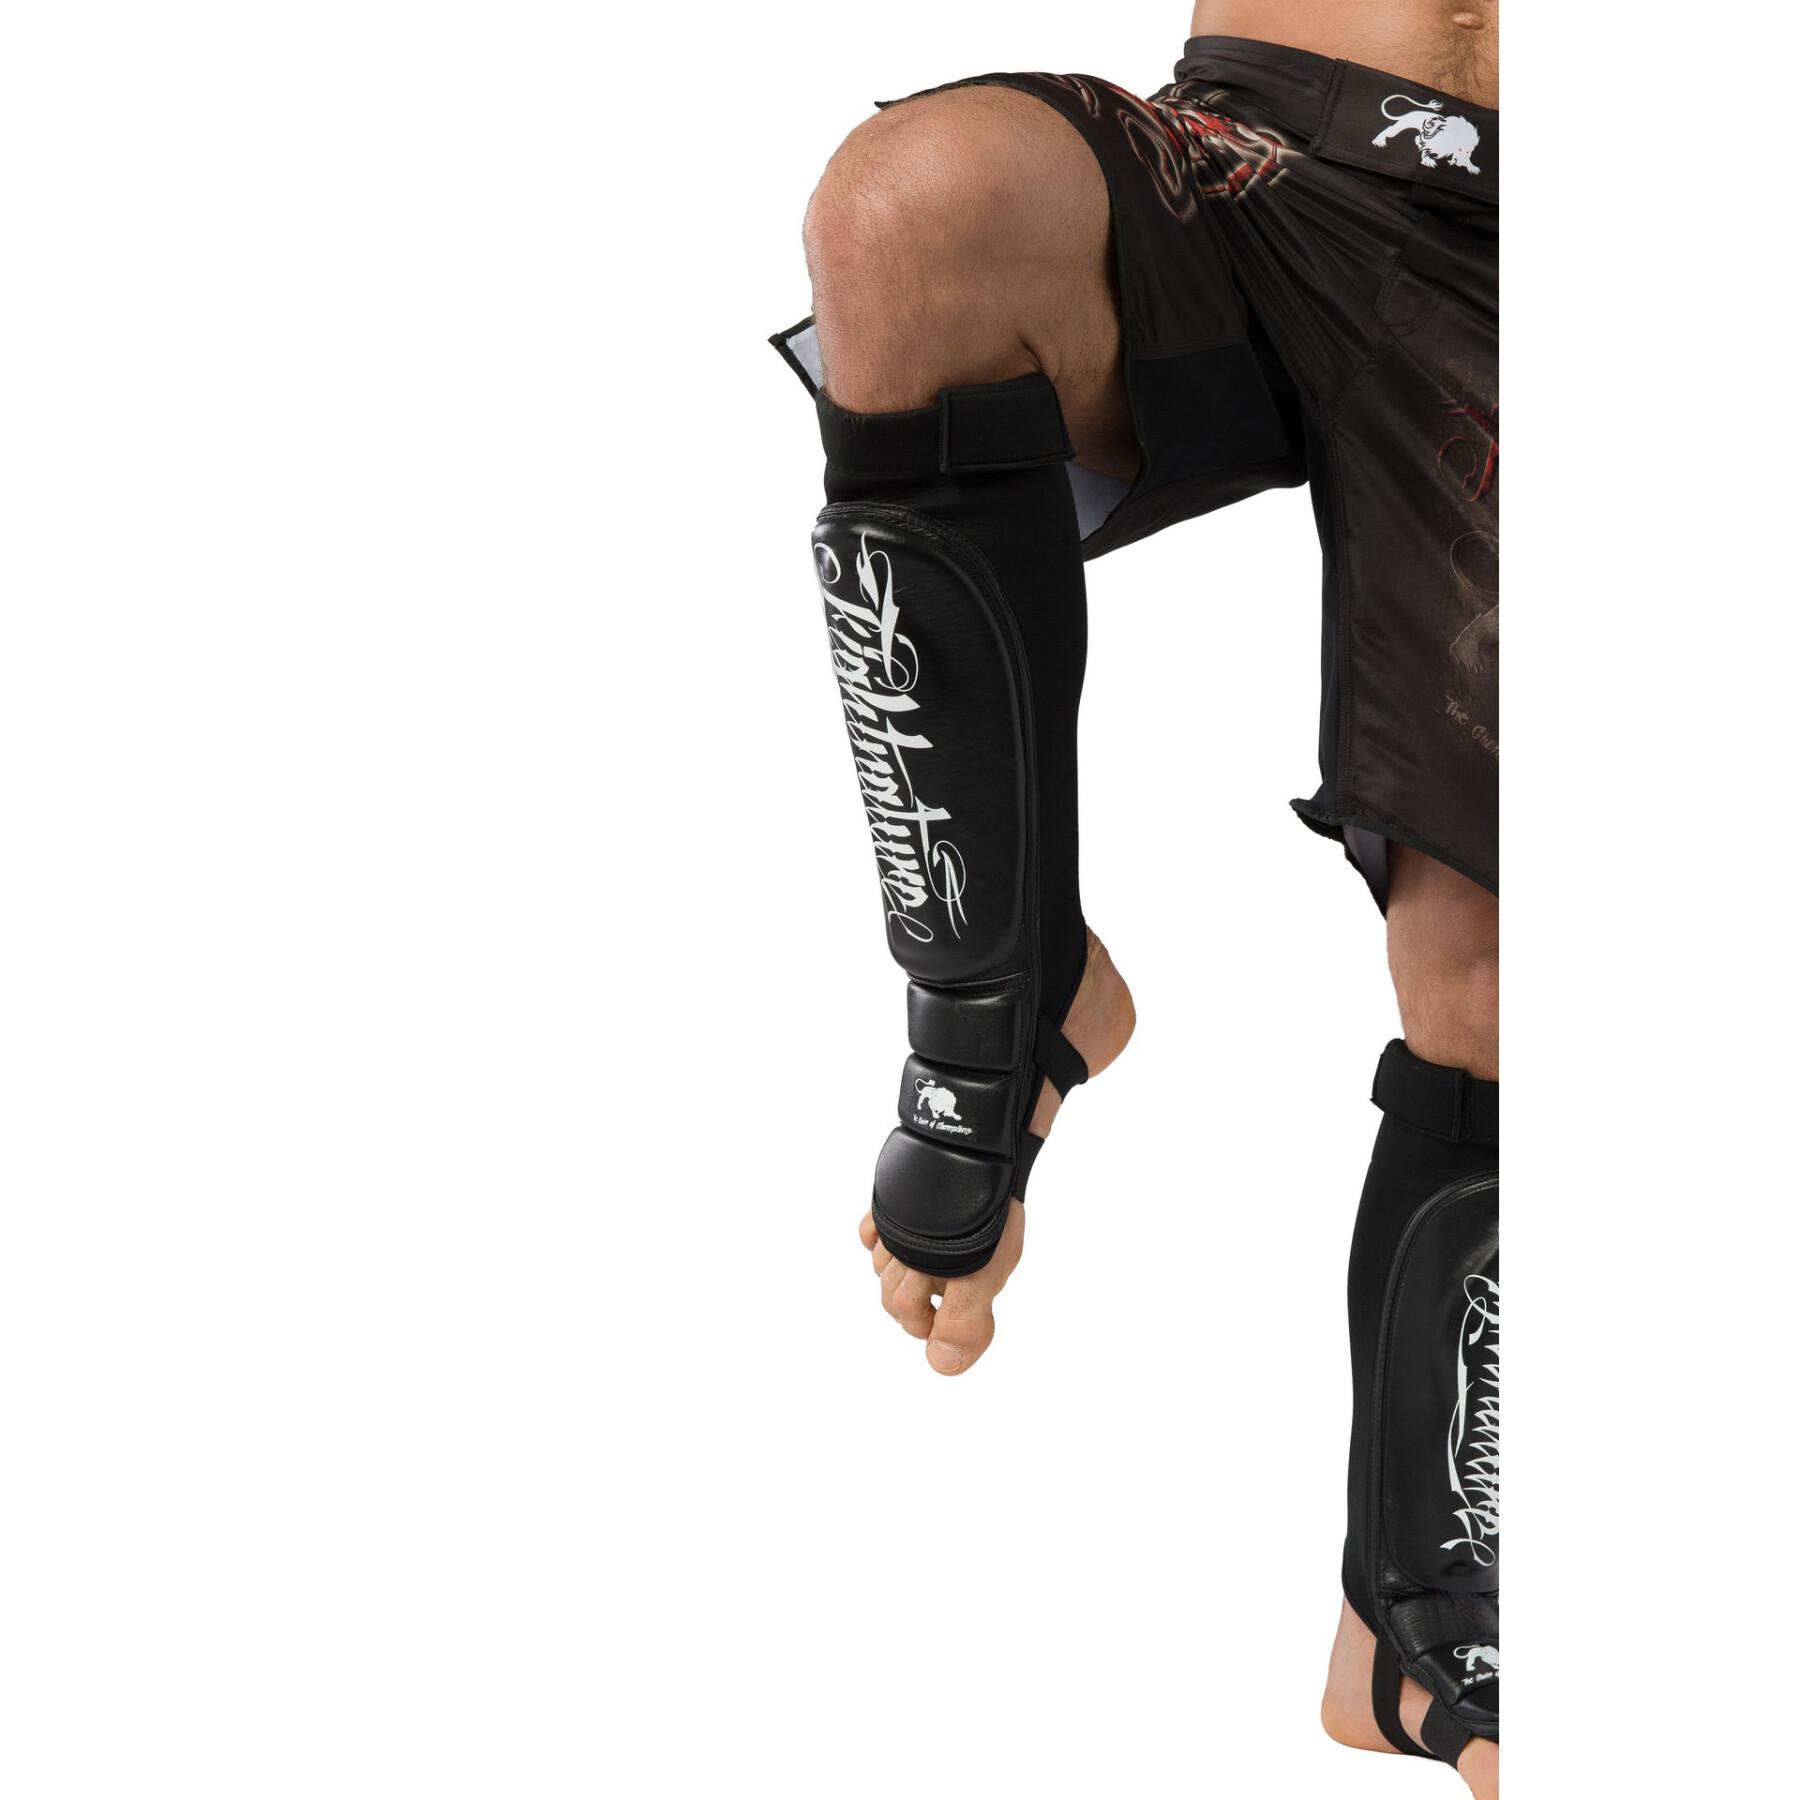 Leather shin and instep guards mma Fightnature